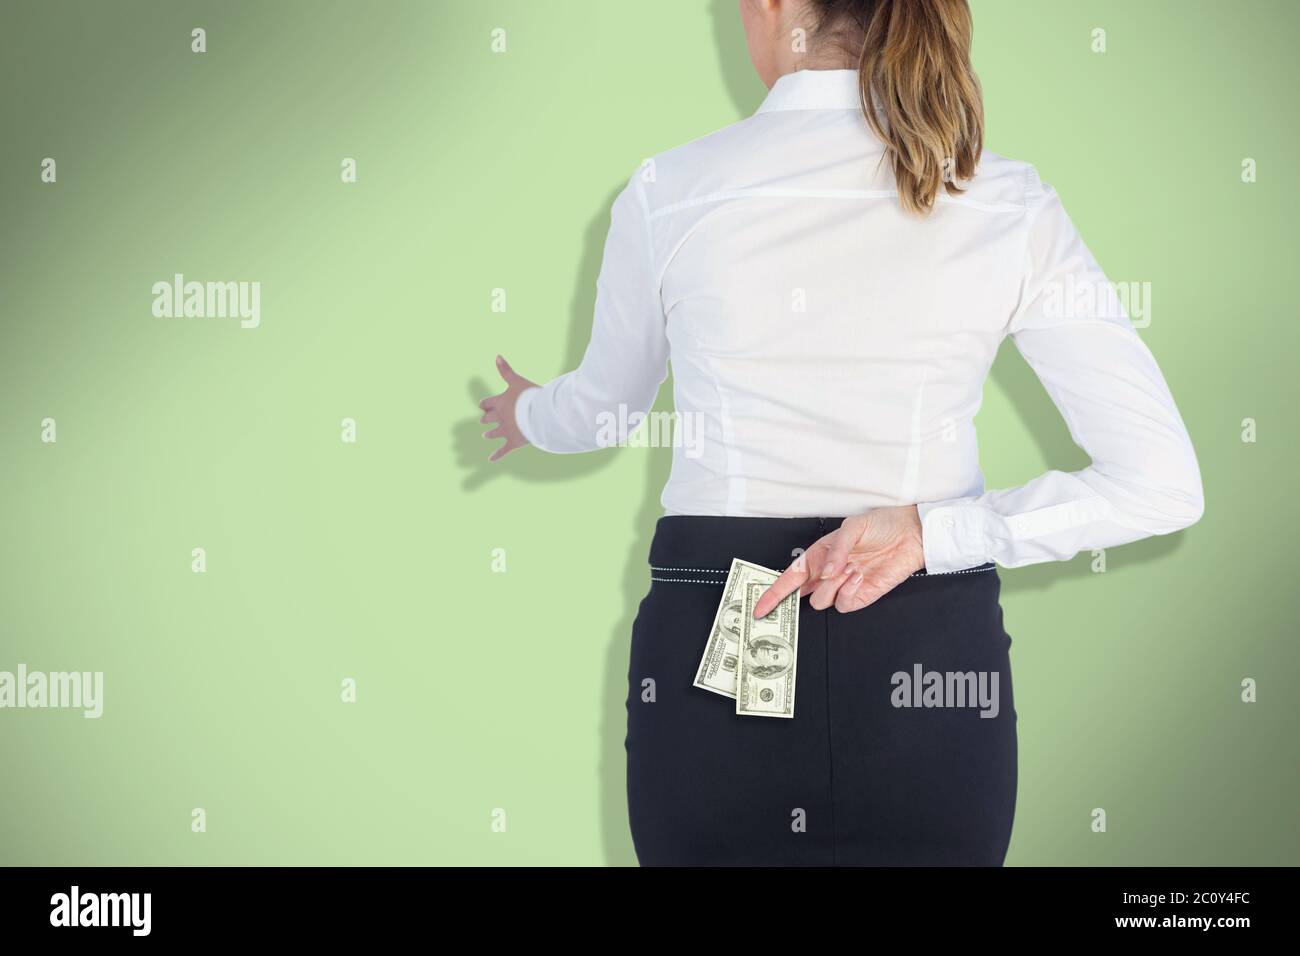 Composite Image Of Businesswoman Offering Handshake With Fingers